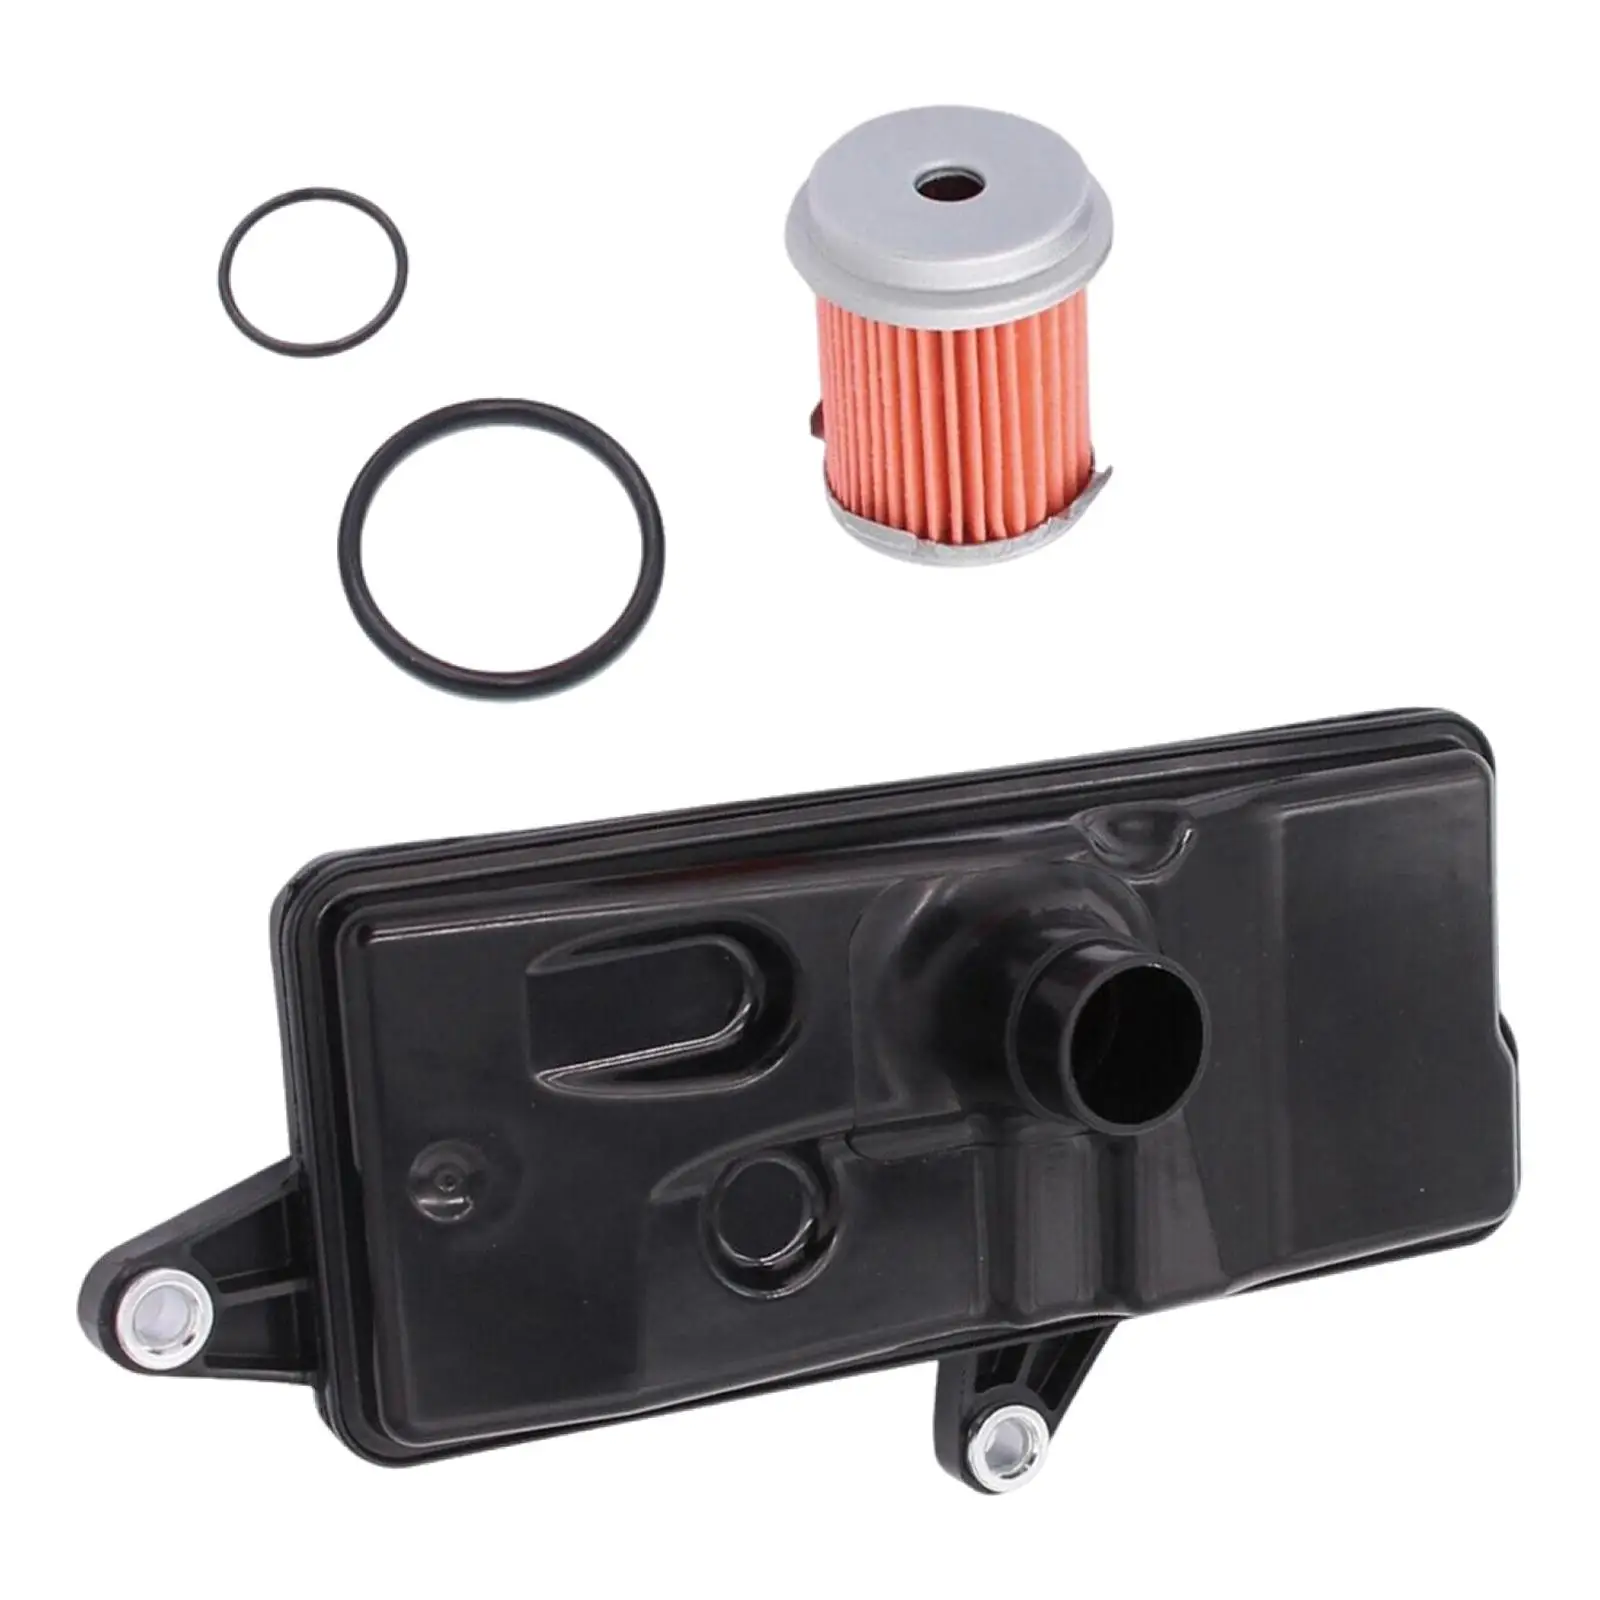 Transmission Gearbox Internal Filter 25450-p4V-013 Professional for Civic FC7 Vehicle Repair Parts Convenient Installation